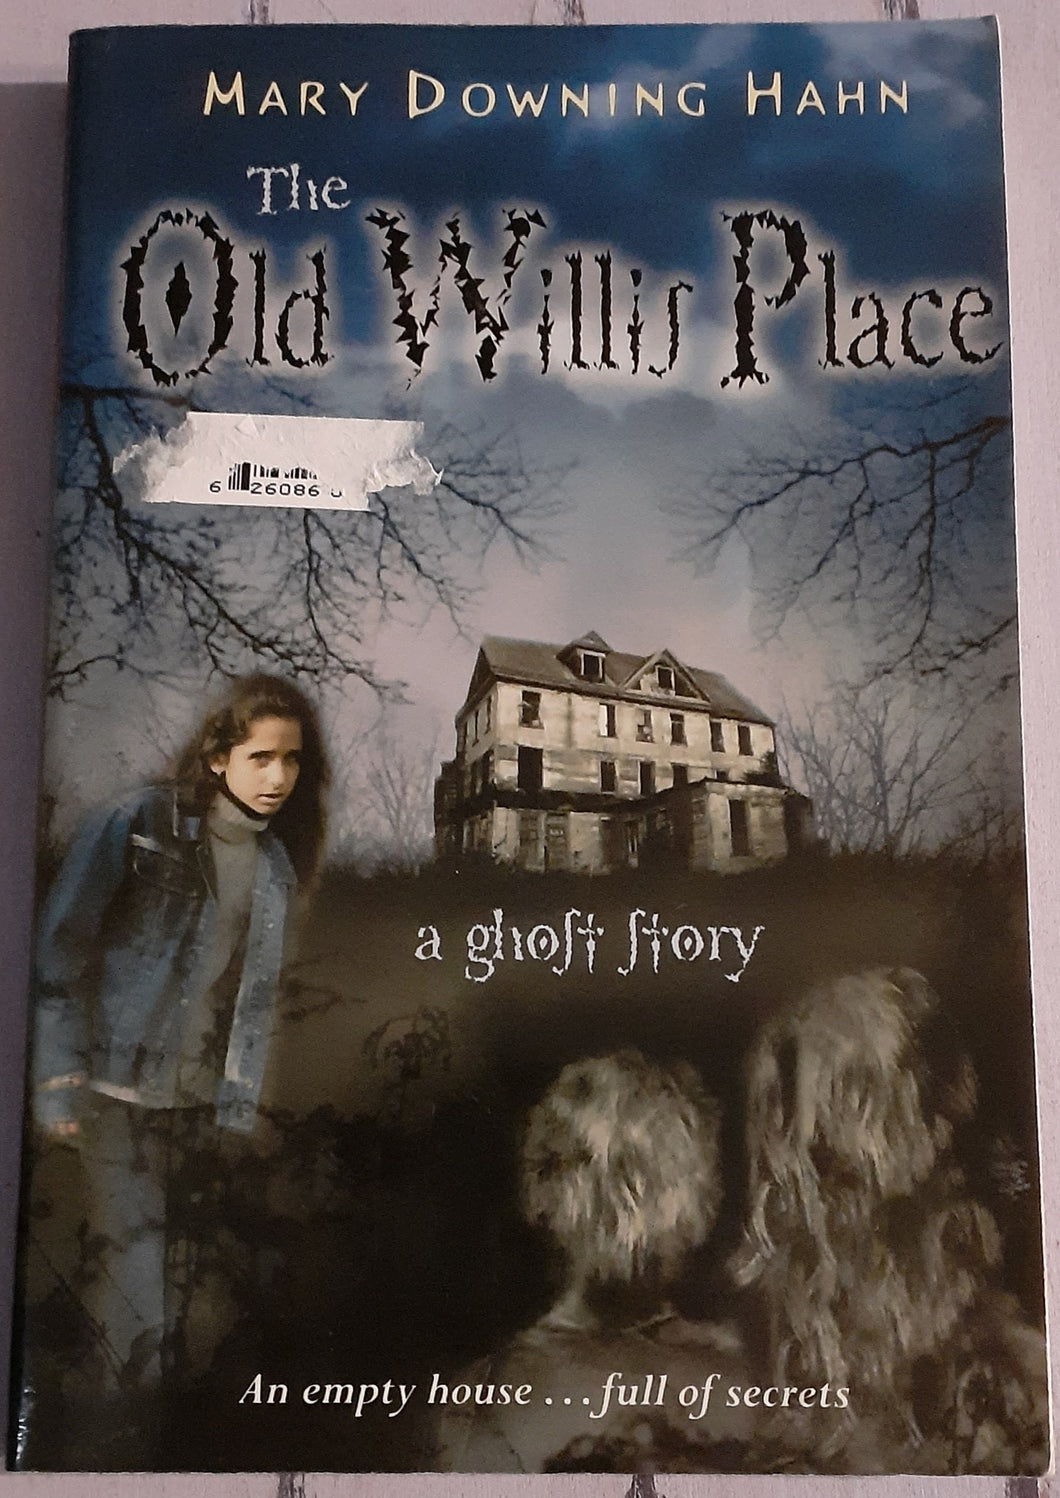 The Old Willis Place - A Ghost Story